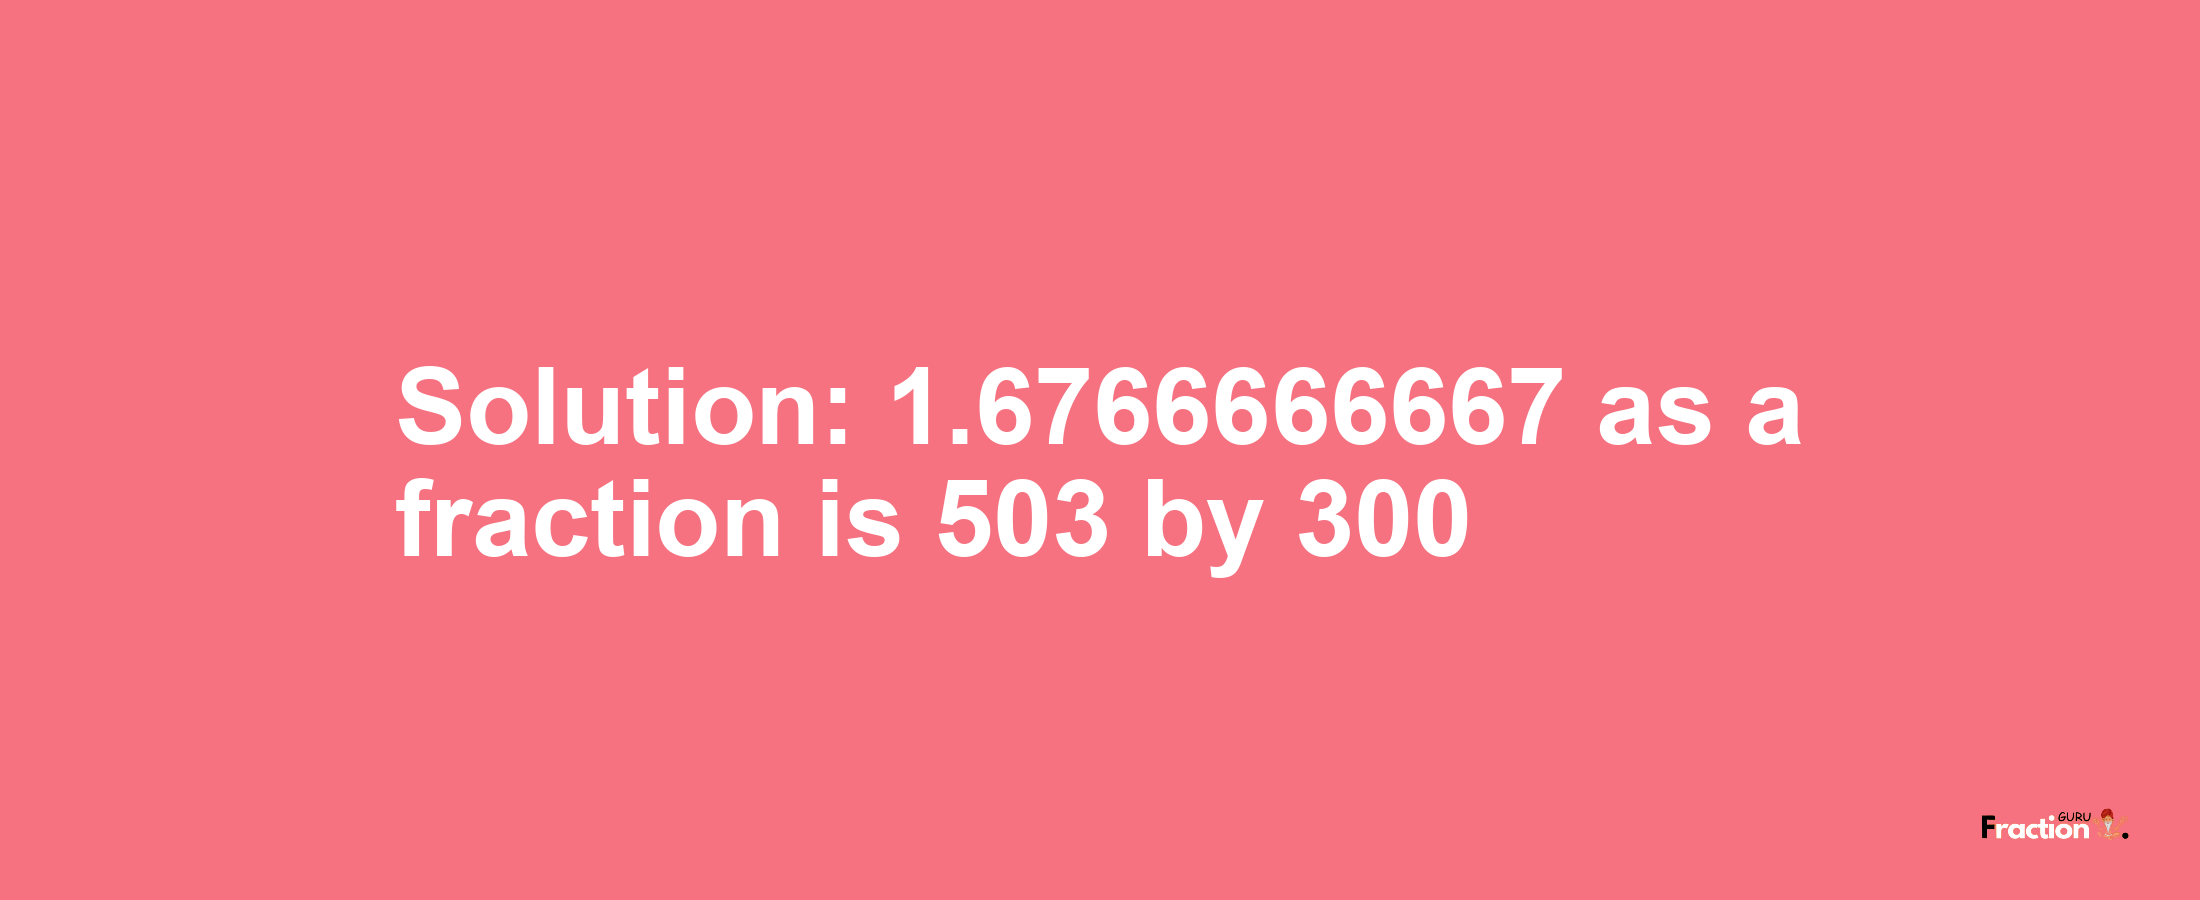 Solution:1.6766666667 as a fraction is 503/300